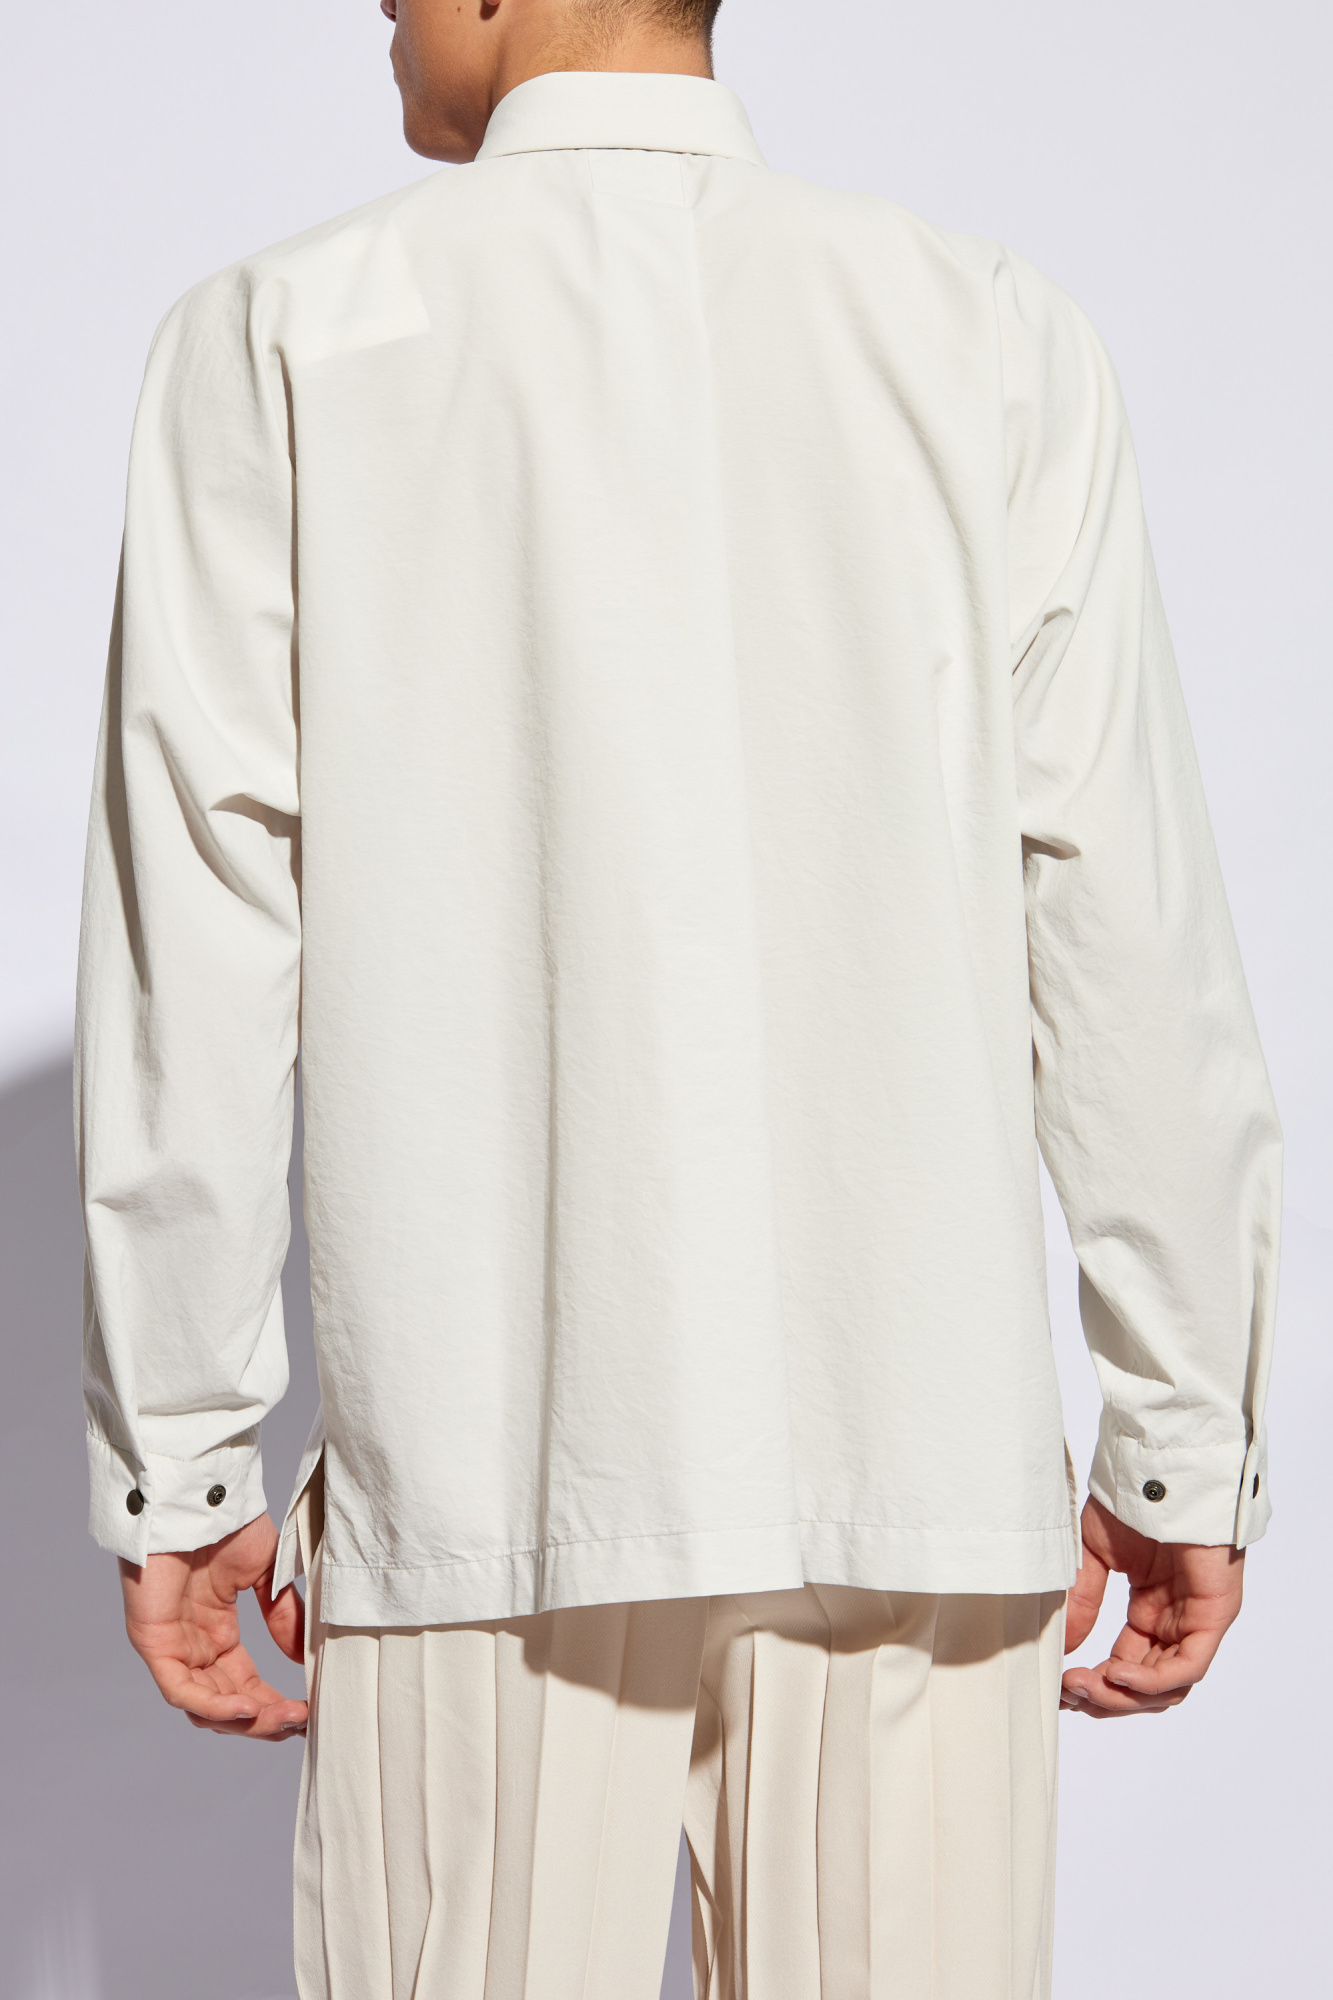 Issey Miyake Homme Plisse Long-sleeved shirt by Issey Miyake Homme 